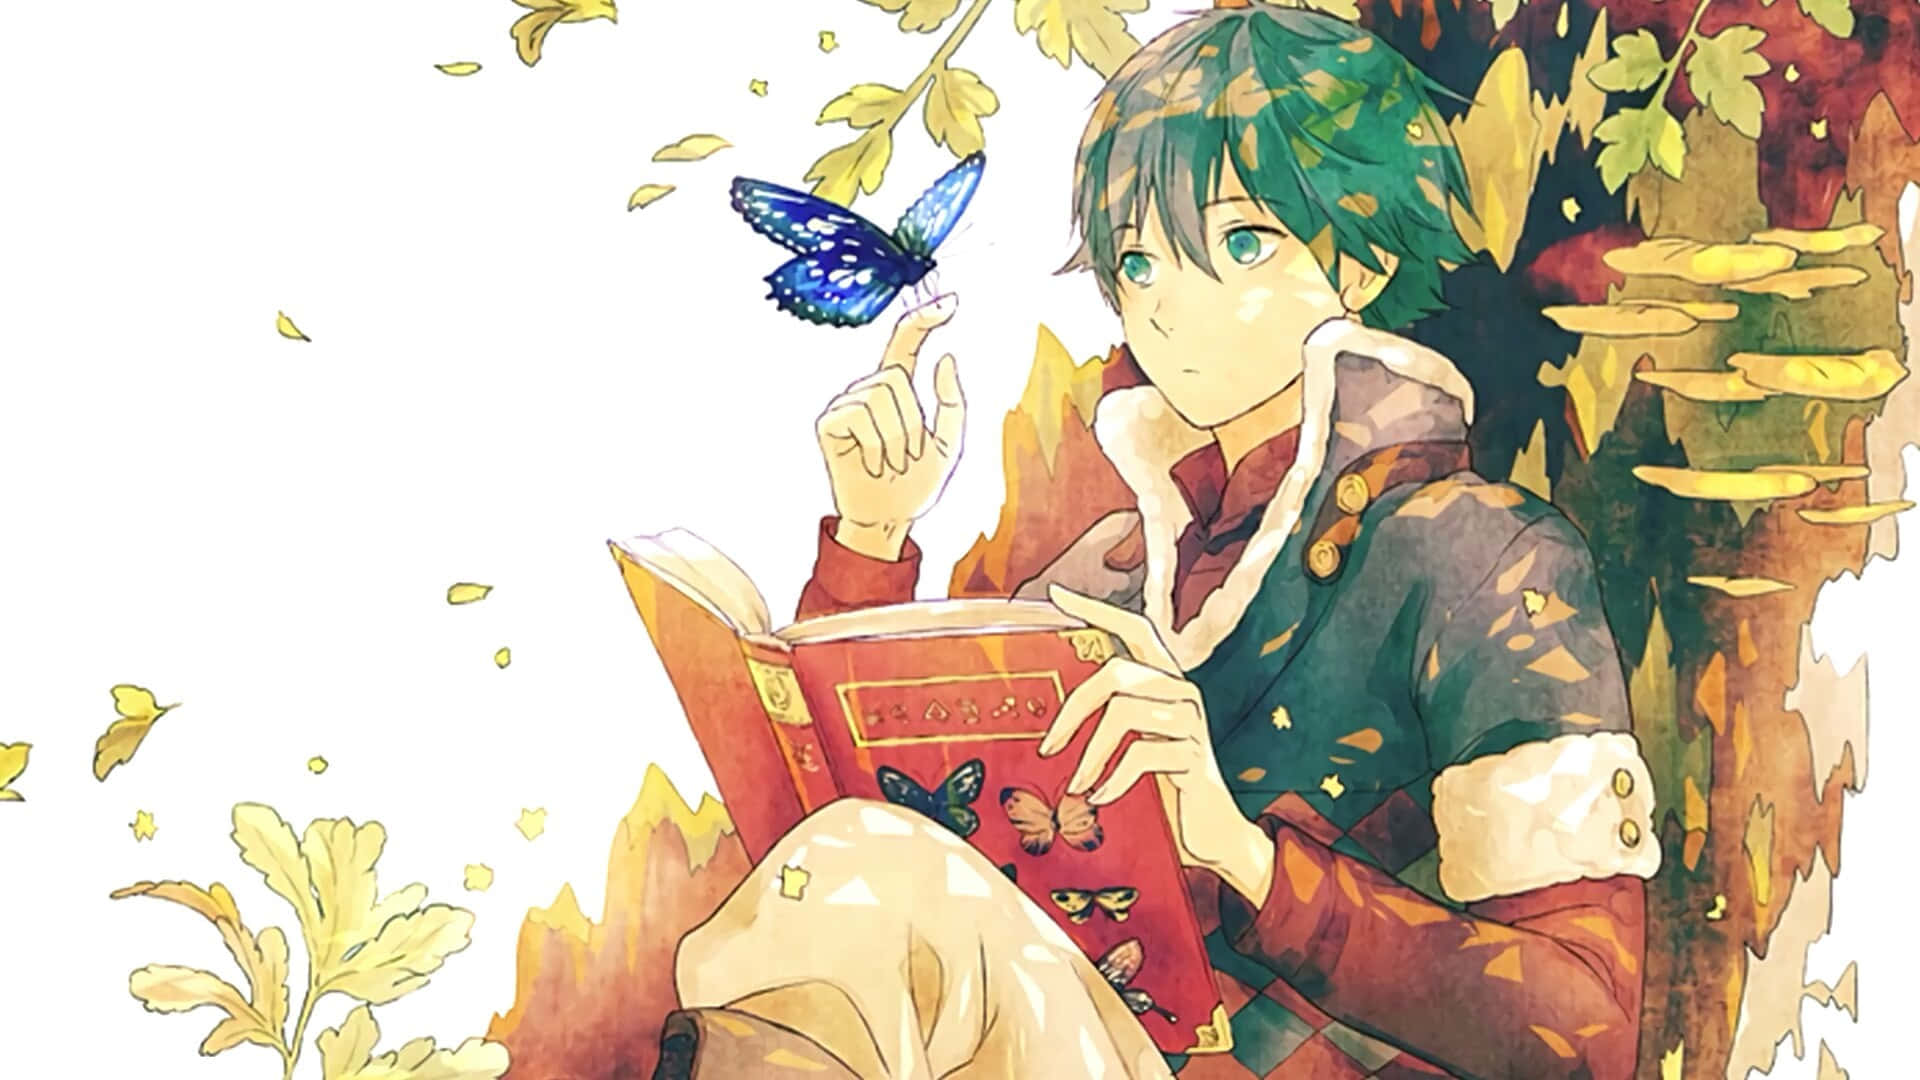 A Boy Is Sitting In The Leaves Reading A Book